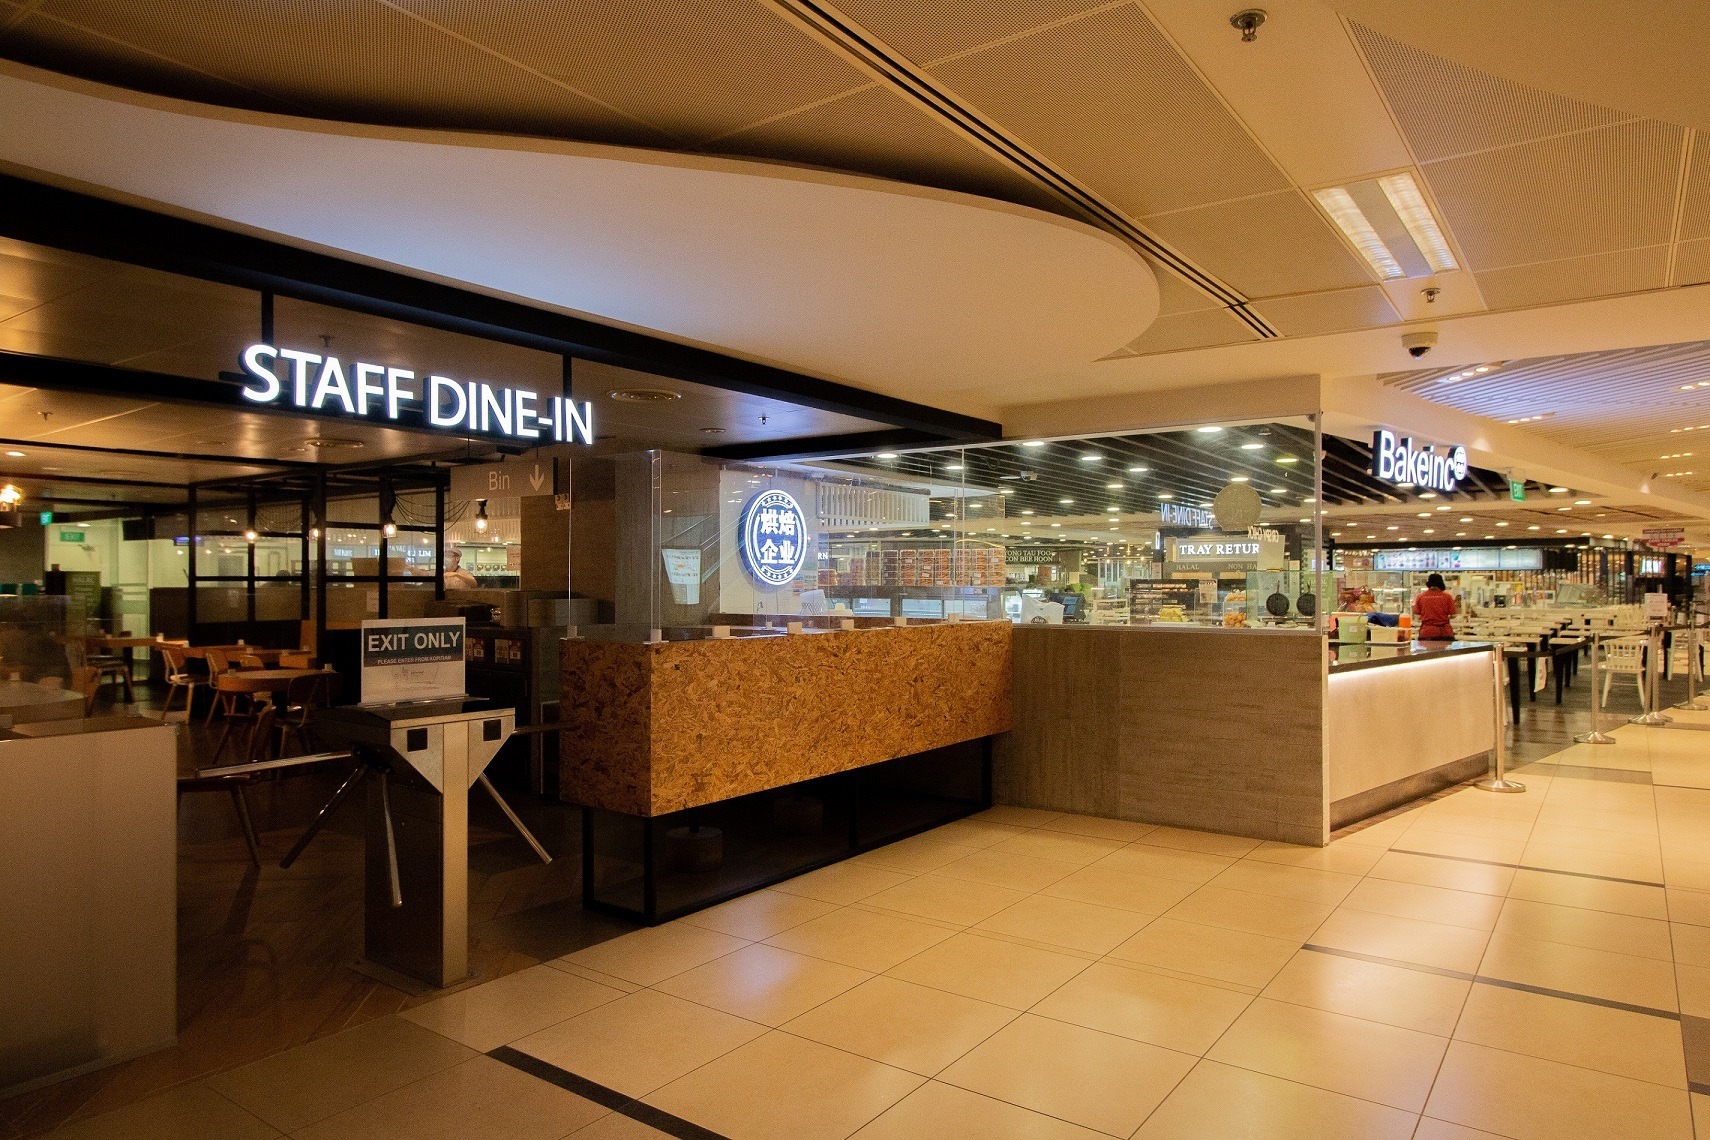 Dedicated rest and dining area for airport staff at Terminal 3 Basement 2